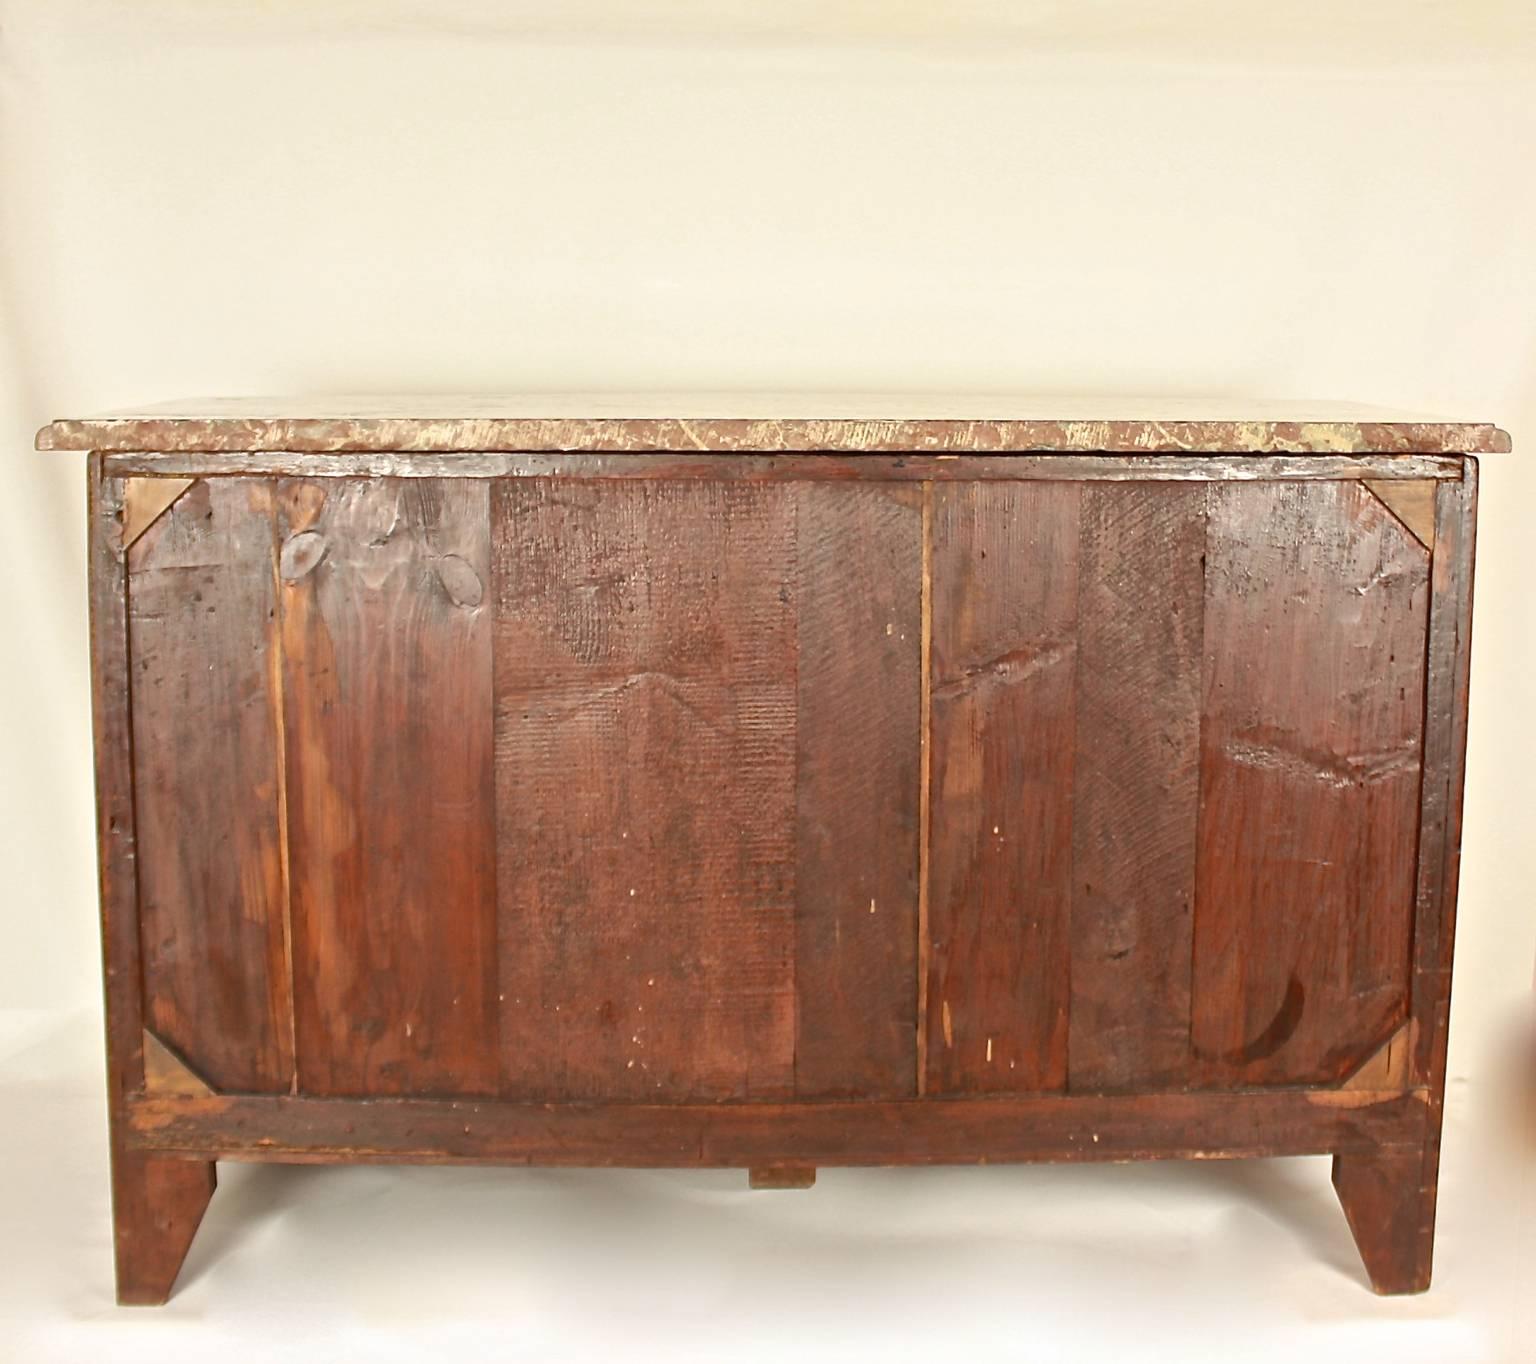 Bronze Early 18th Century Regence commode or Chest of Drawers